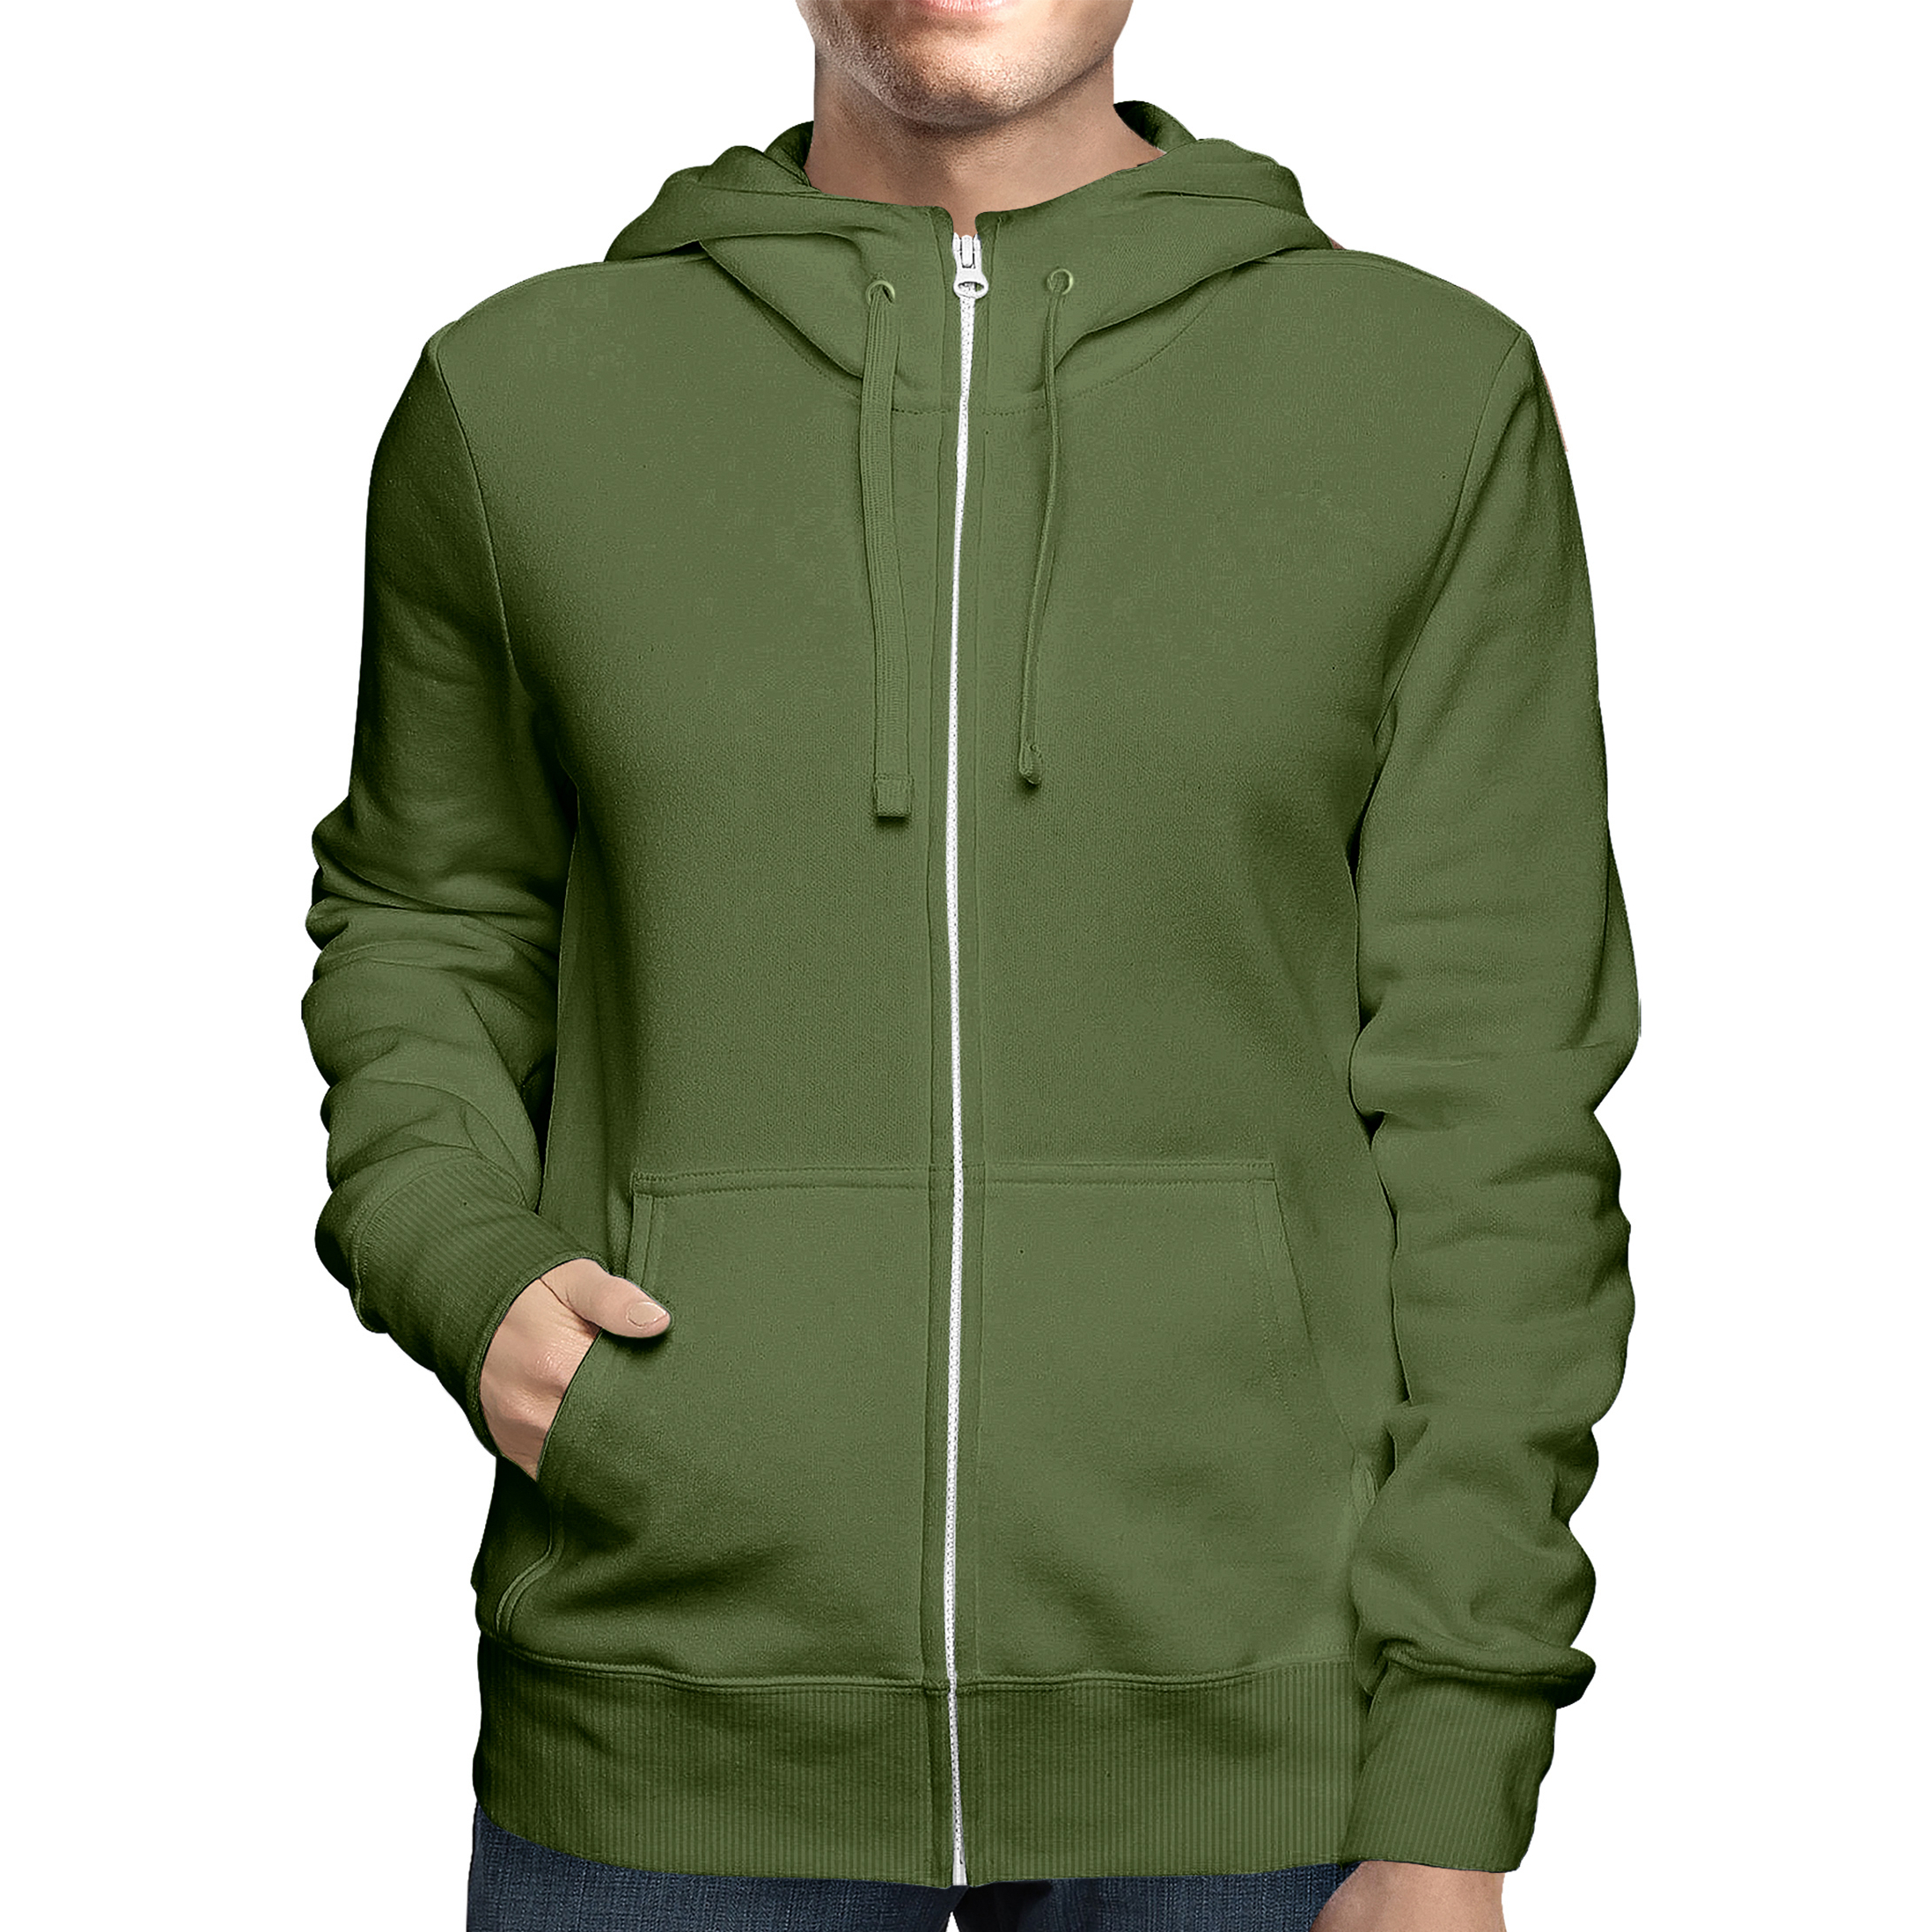 2-Pack: Men's Full Zip Up Fleece-Lined Hoodie Sweatshirt (Big & Tall Size Available) - Olive, 3x-large